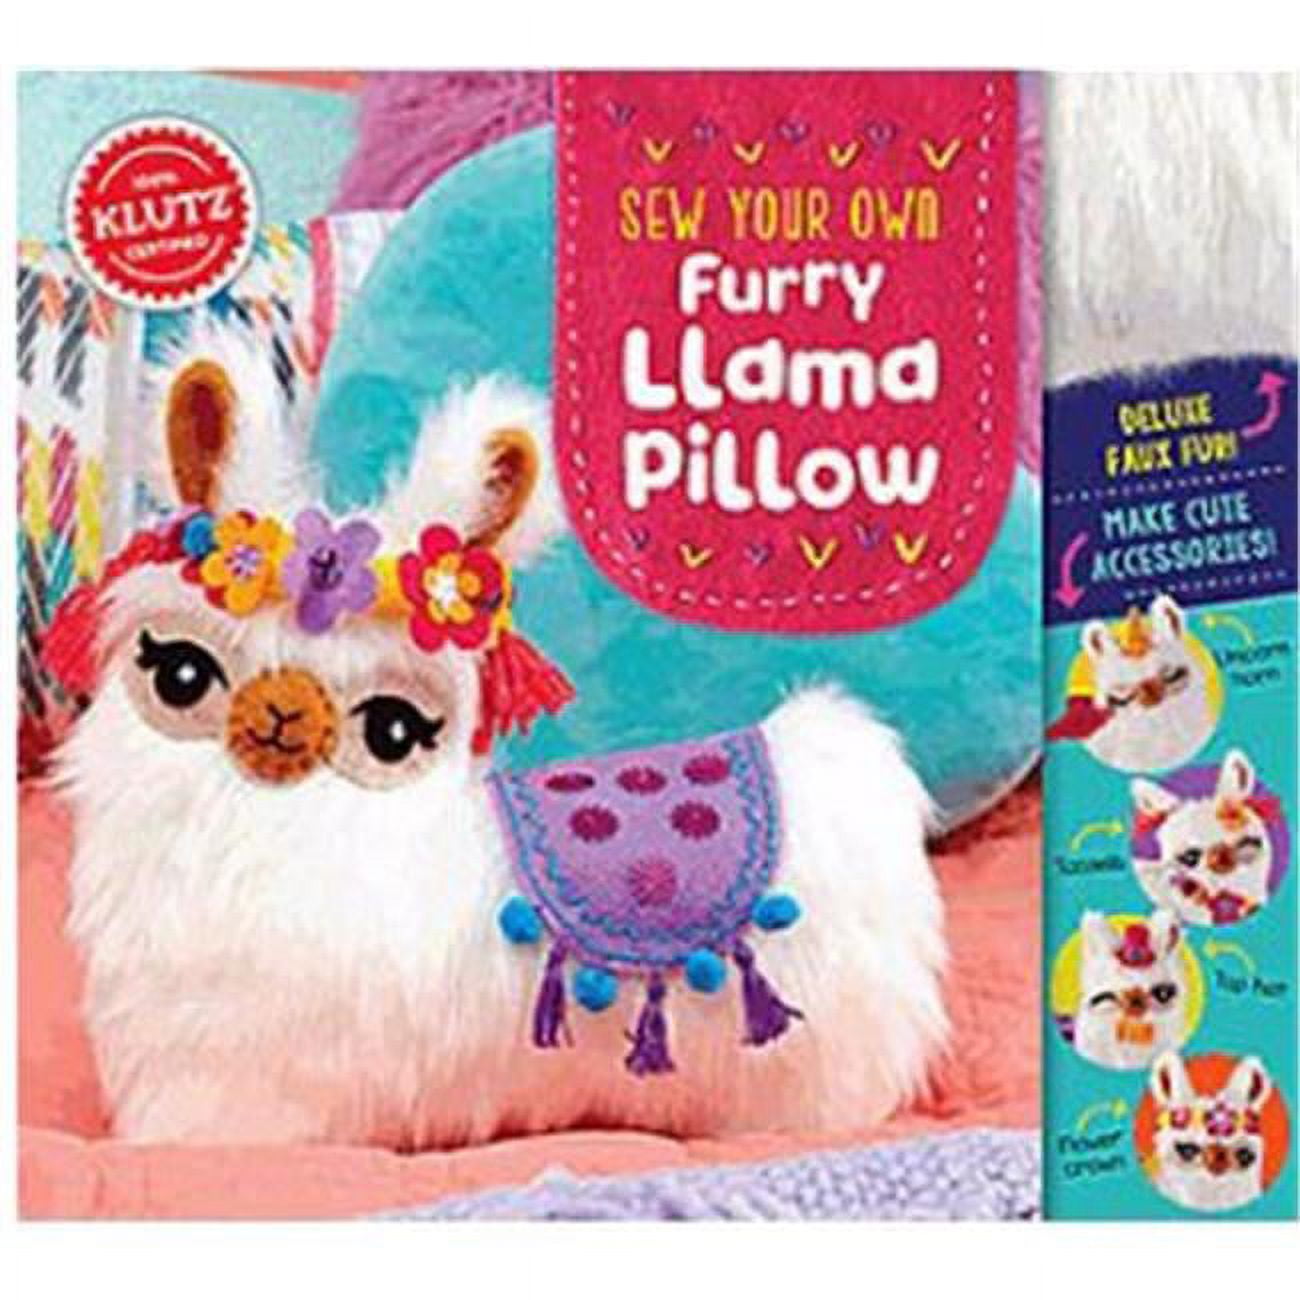 Klutz-Scholastic 159218 Sew Your Own Furry Llama Pillow Kit - Ages